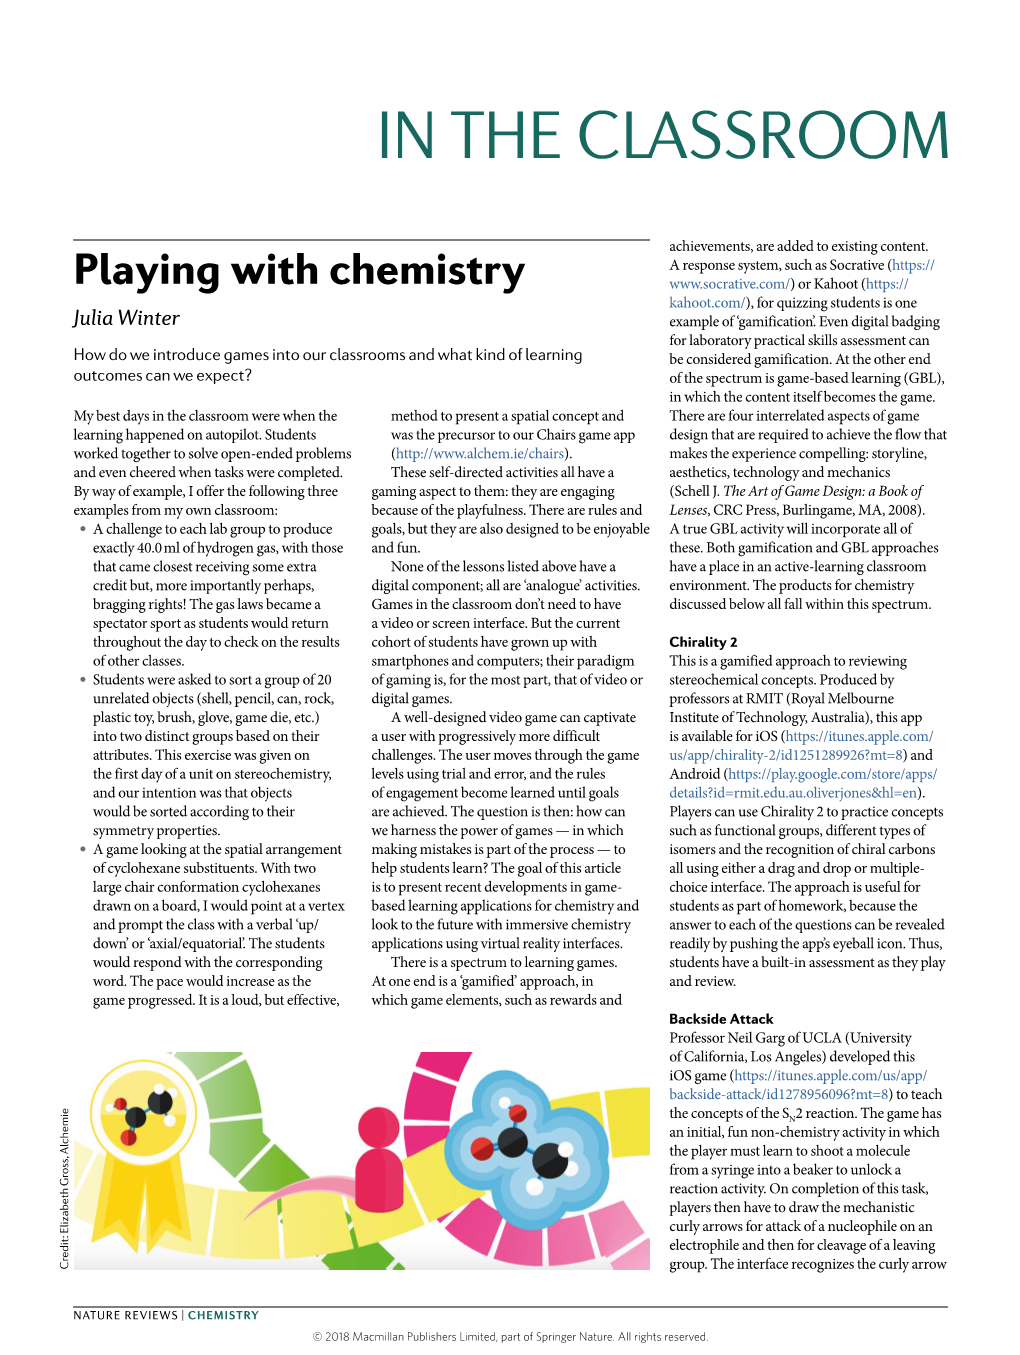 Playing with Chemistry Or Kahoot ( Kahoot.Com/), for Quizzing Students Is One Julia Winter Example of ‘Gamification’